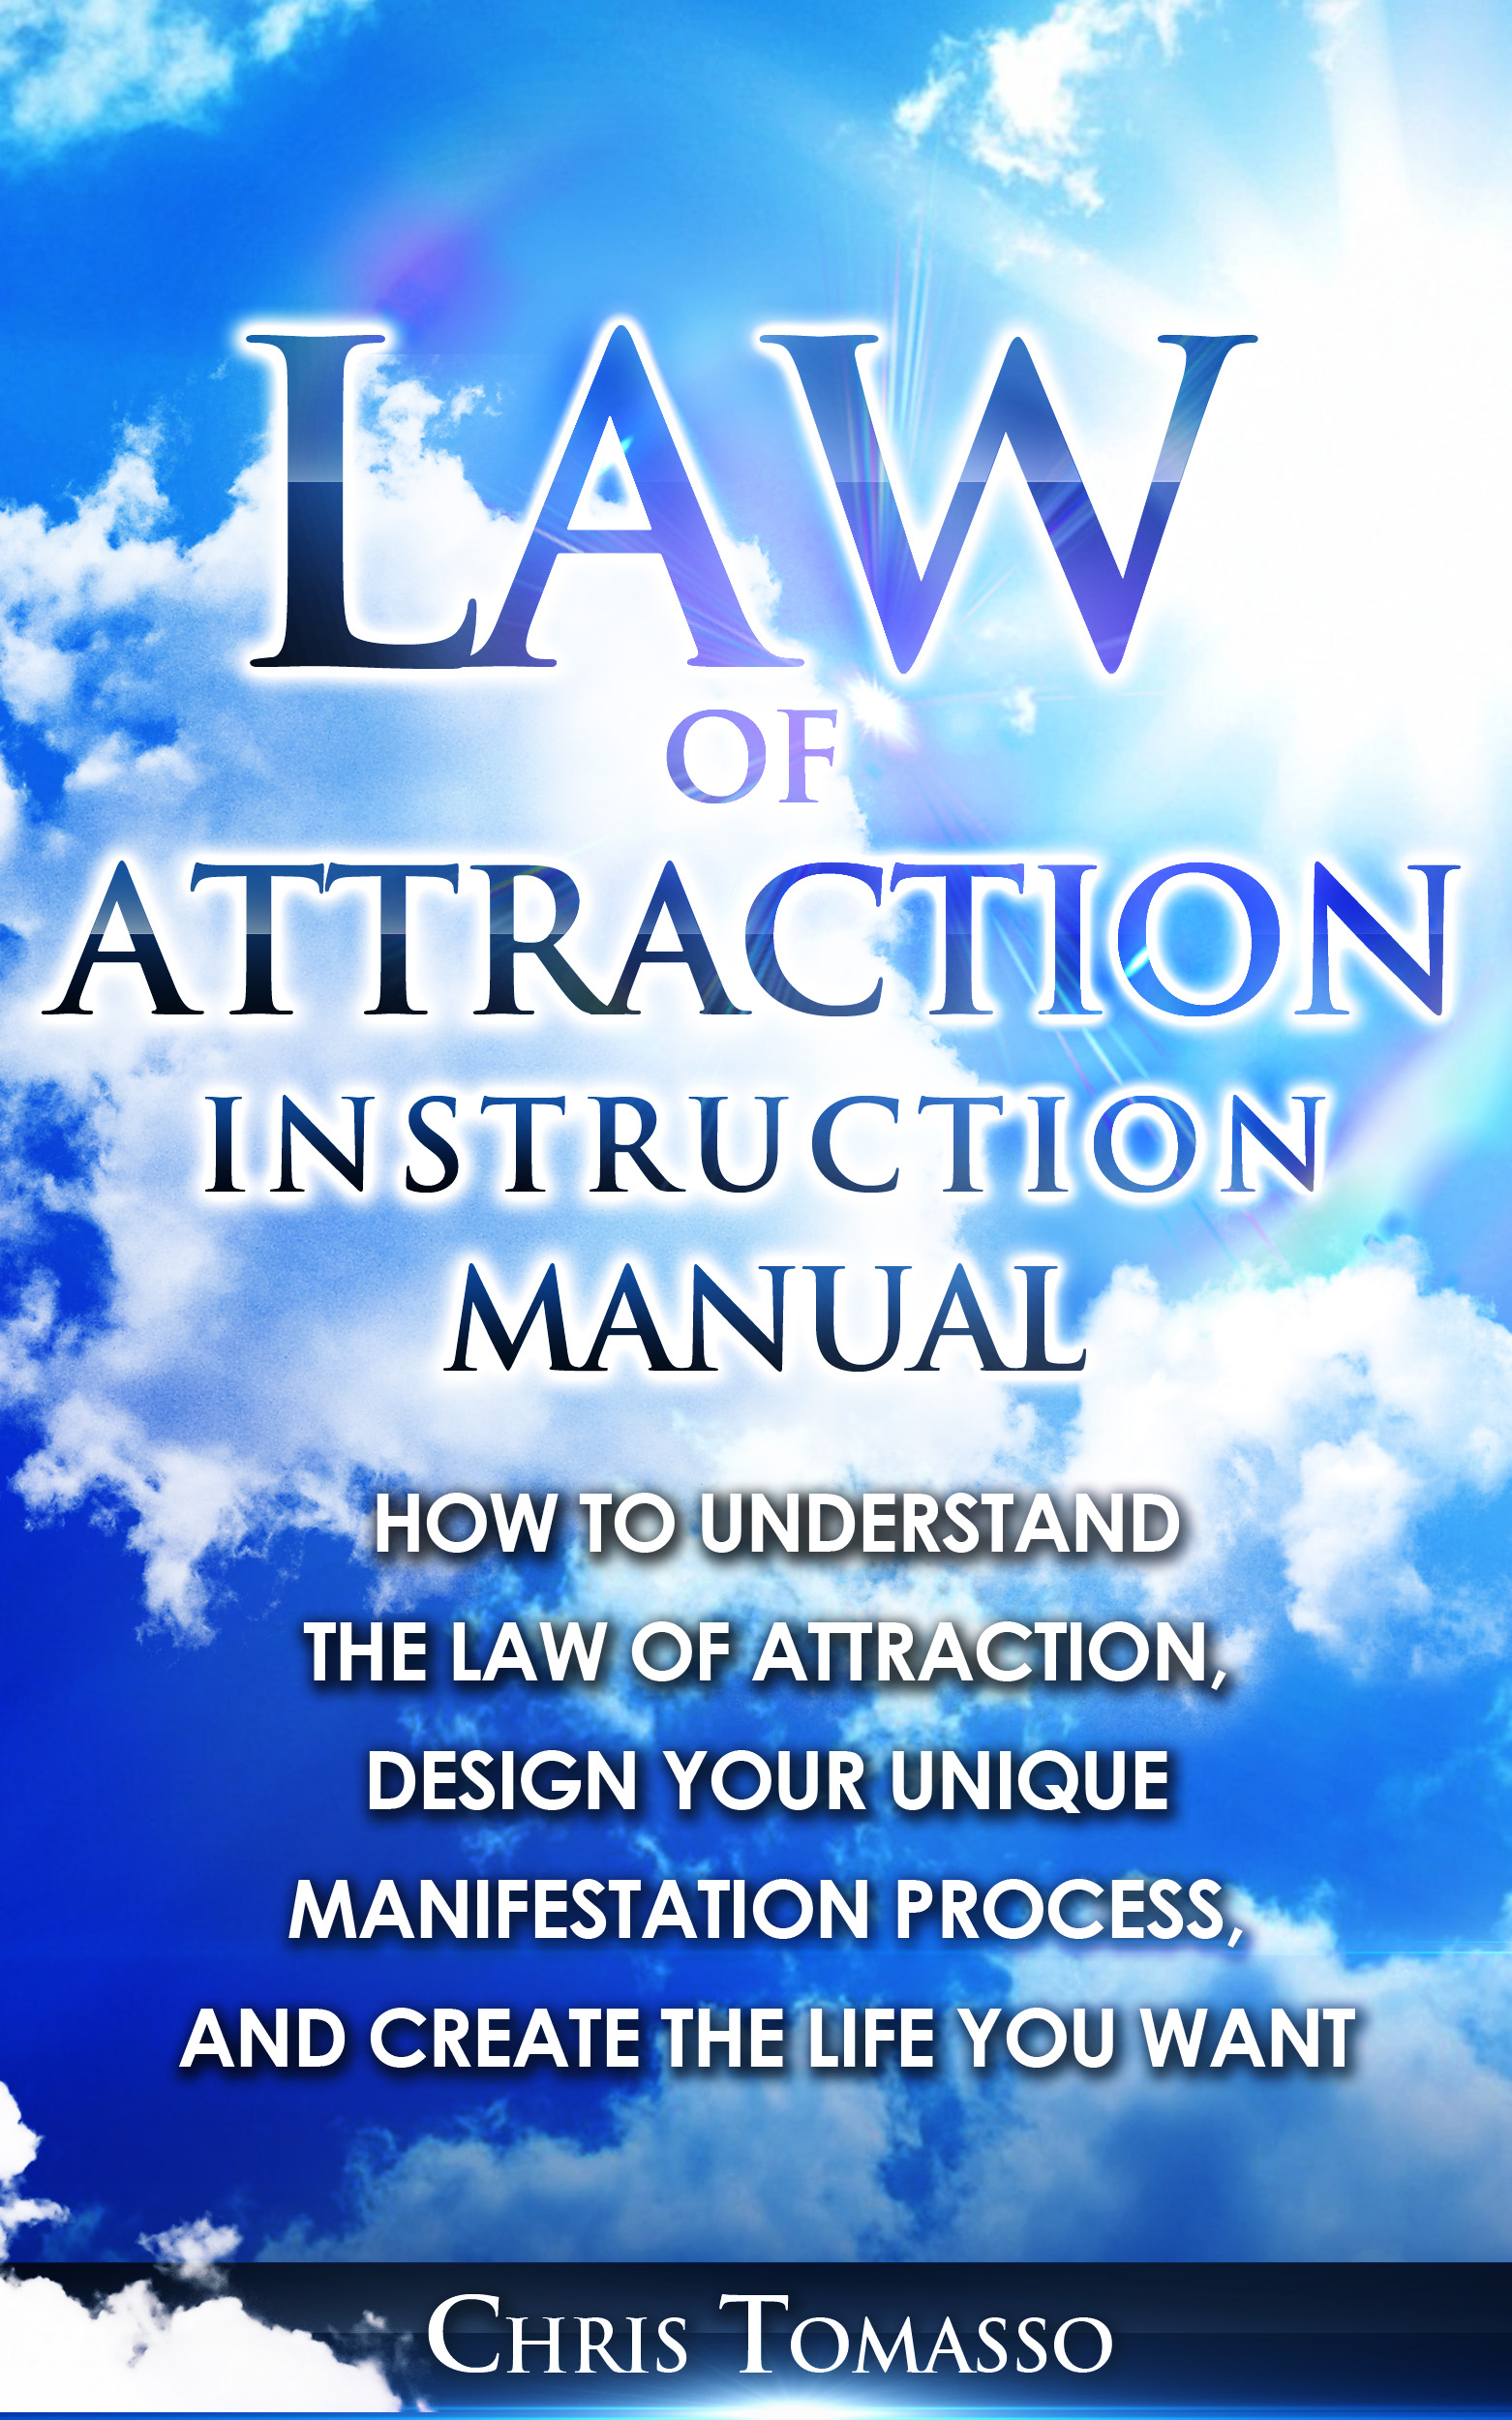 Laws Of Attraction #6